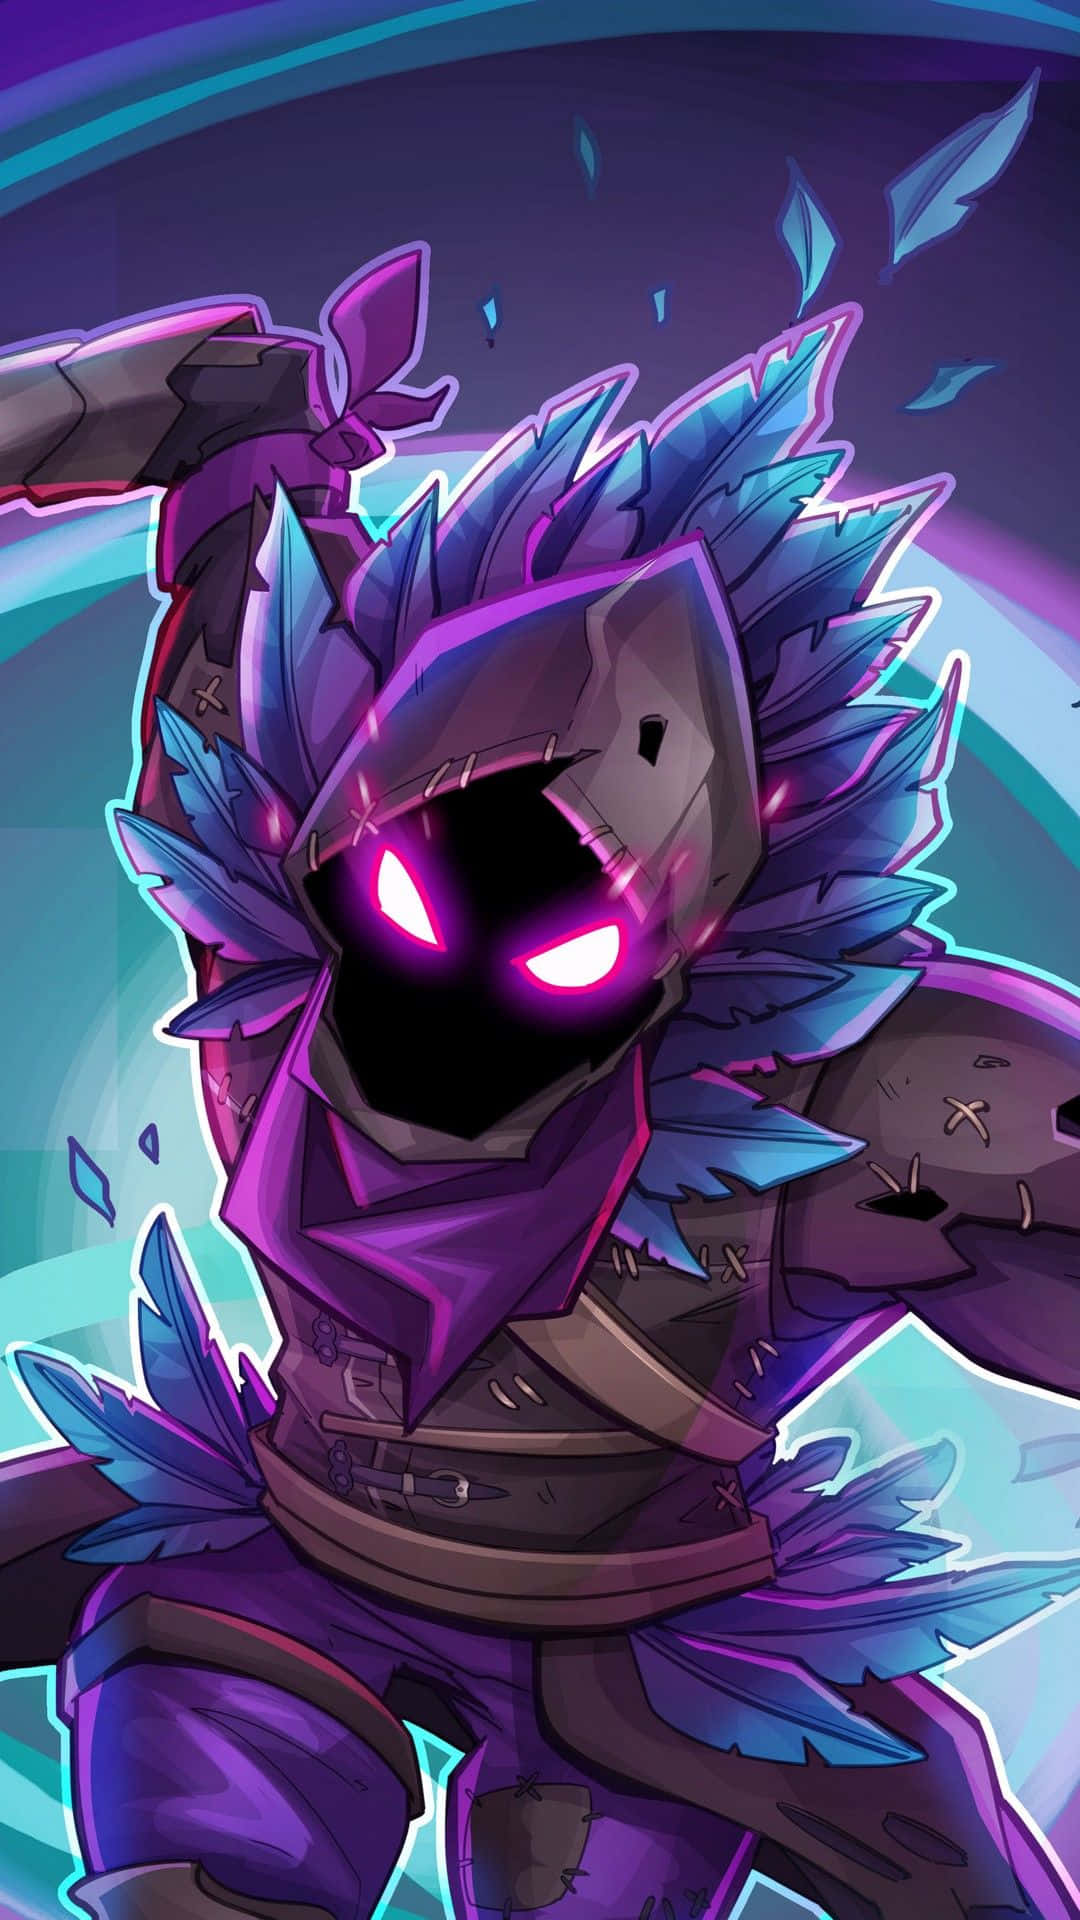 Adorable Fortnite Character in Action Wallpaper